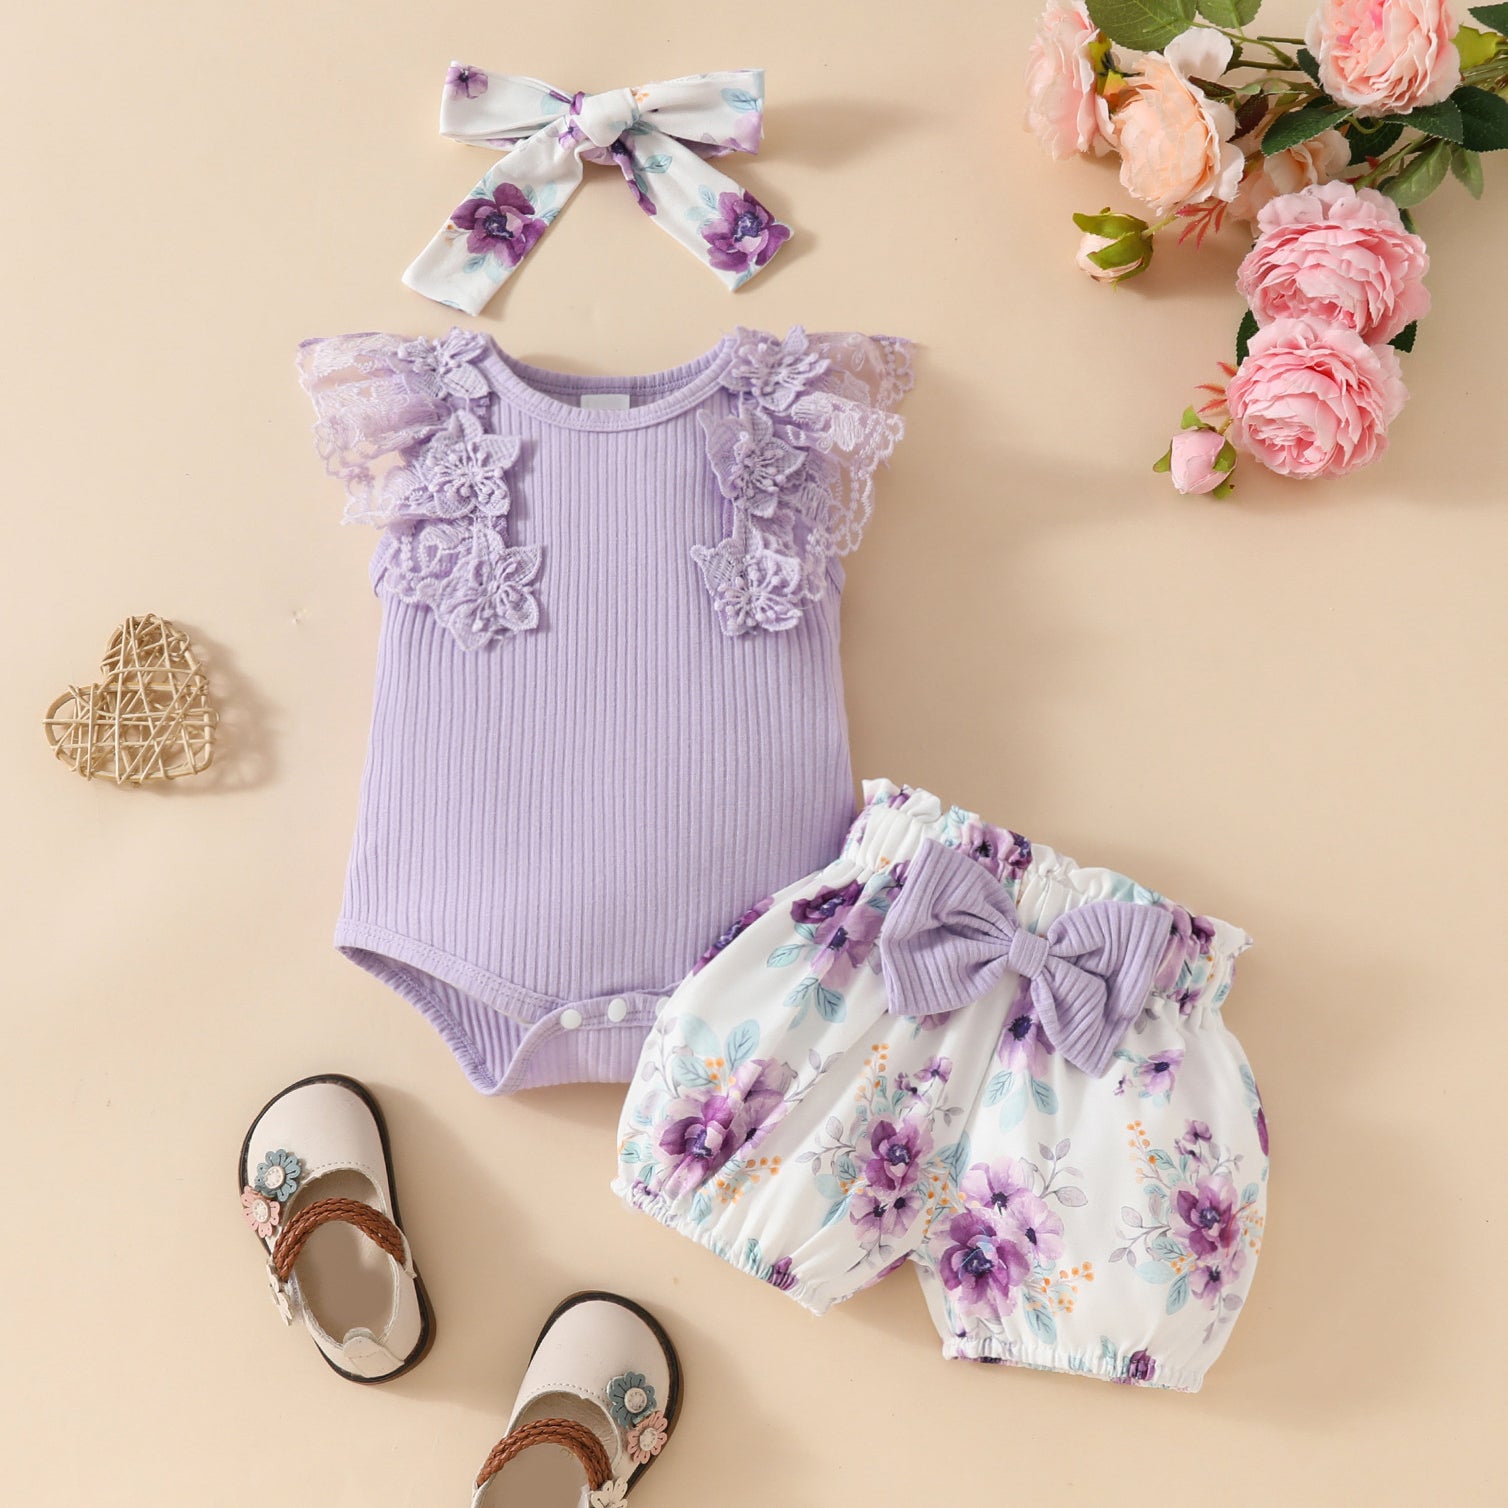 3PCS Sweet Floral Printed Lace Splicing Baby Romper Set